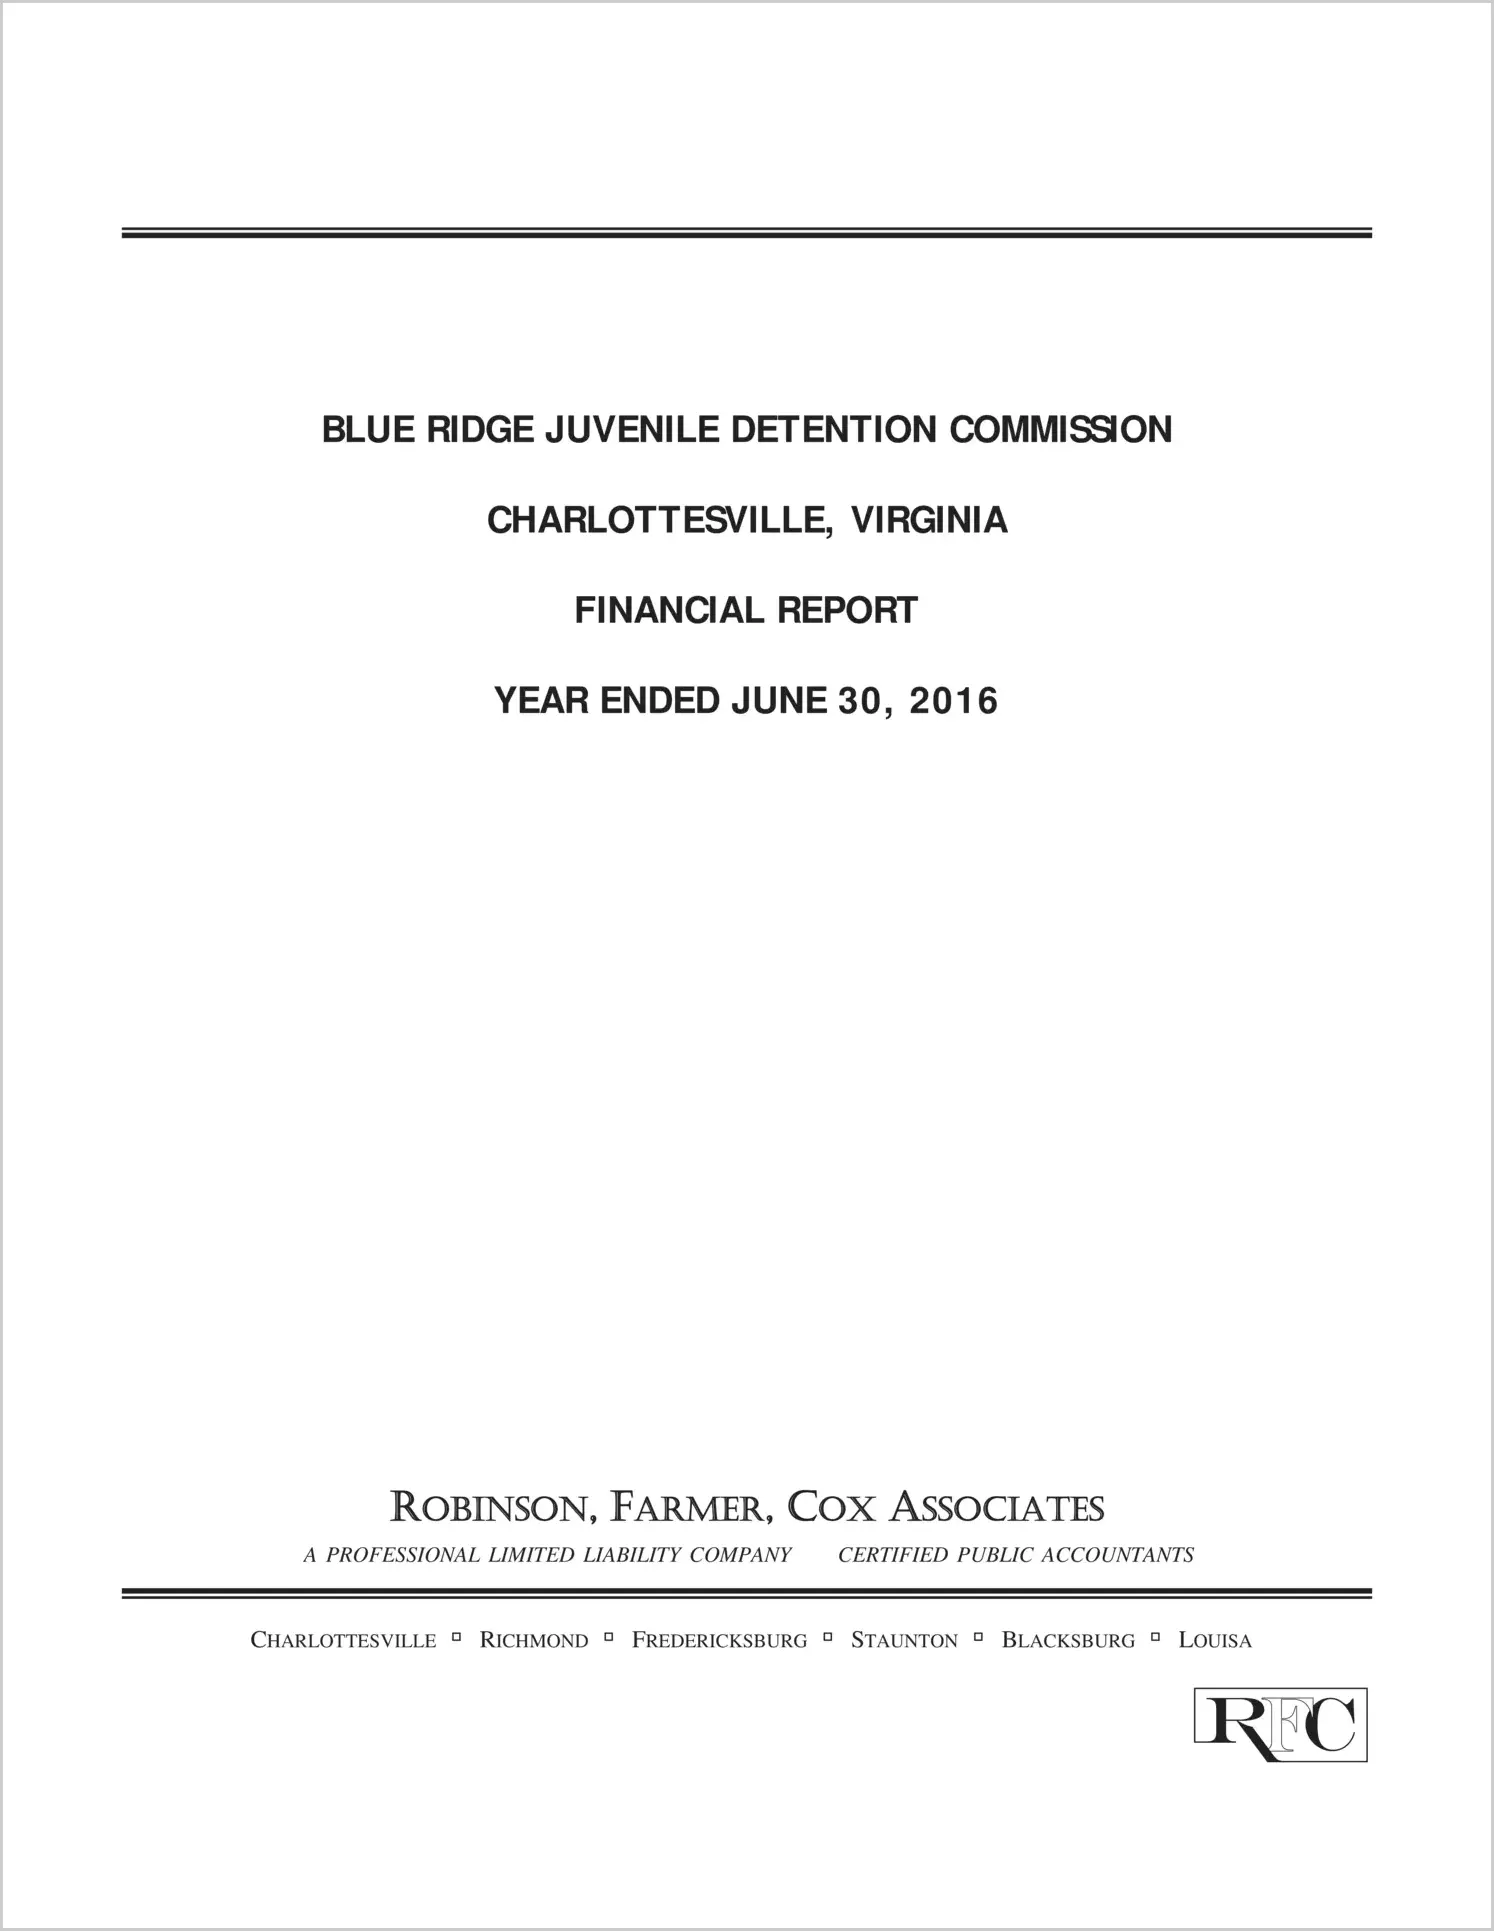 2016 ABC/Other Annual Financial Report  for Blue Ridge Juvenile Detention Commission